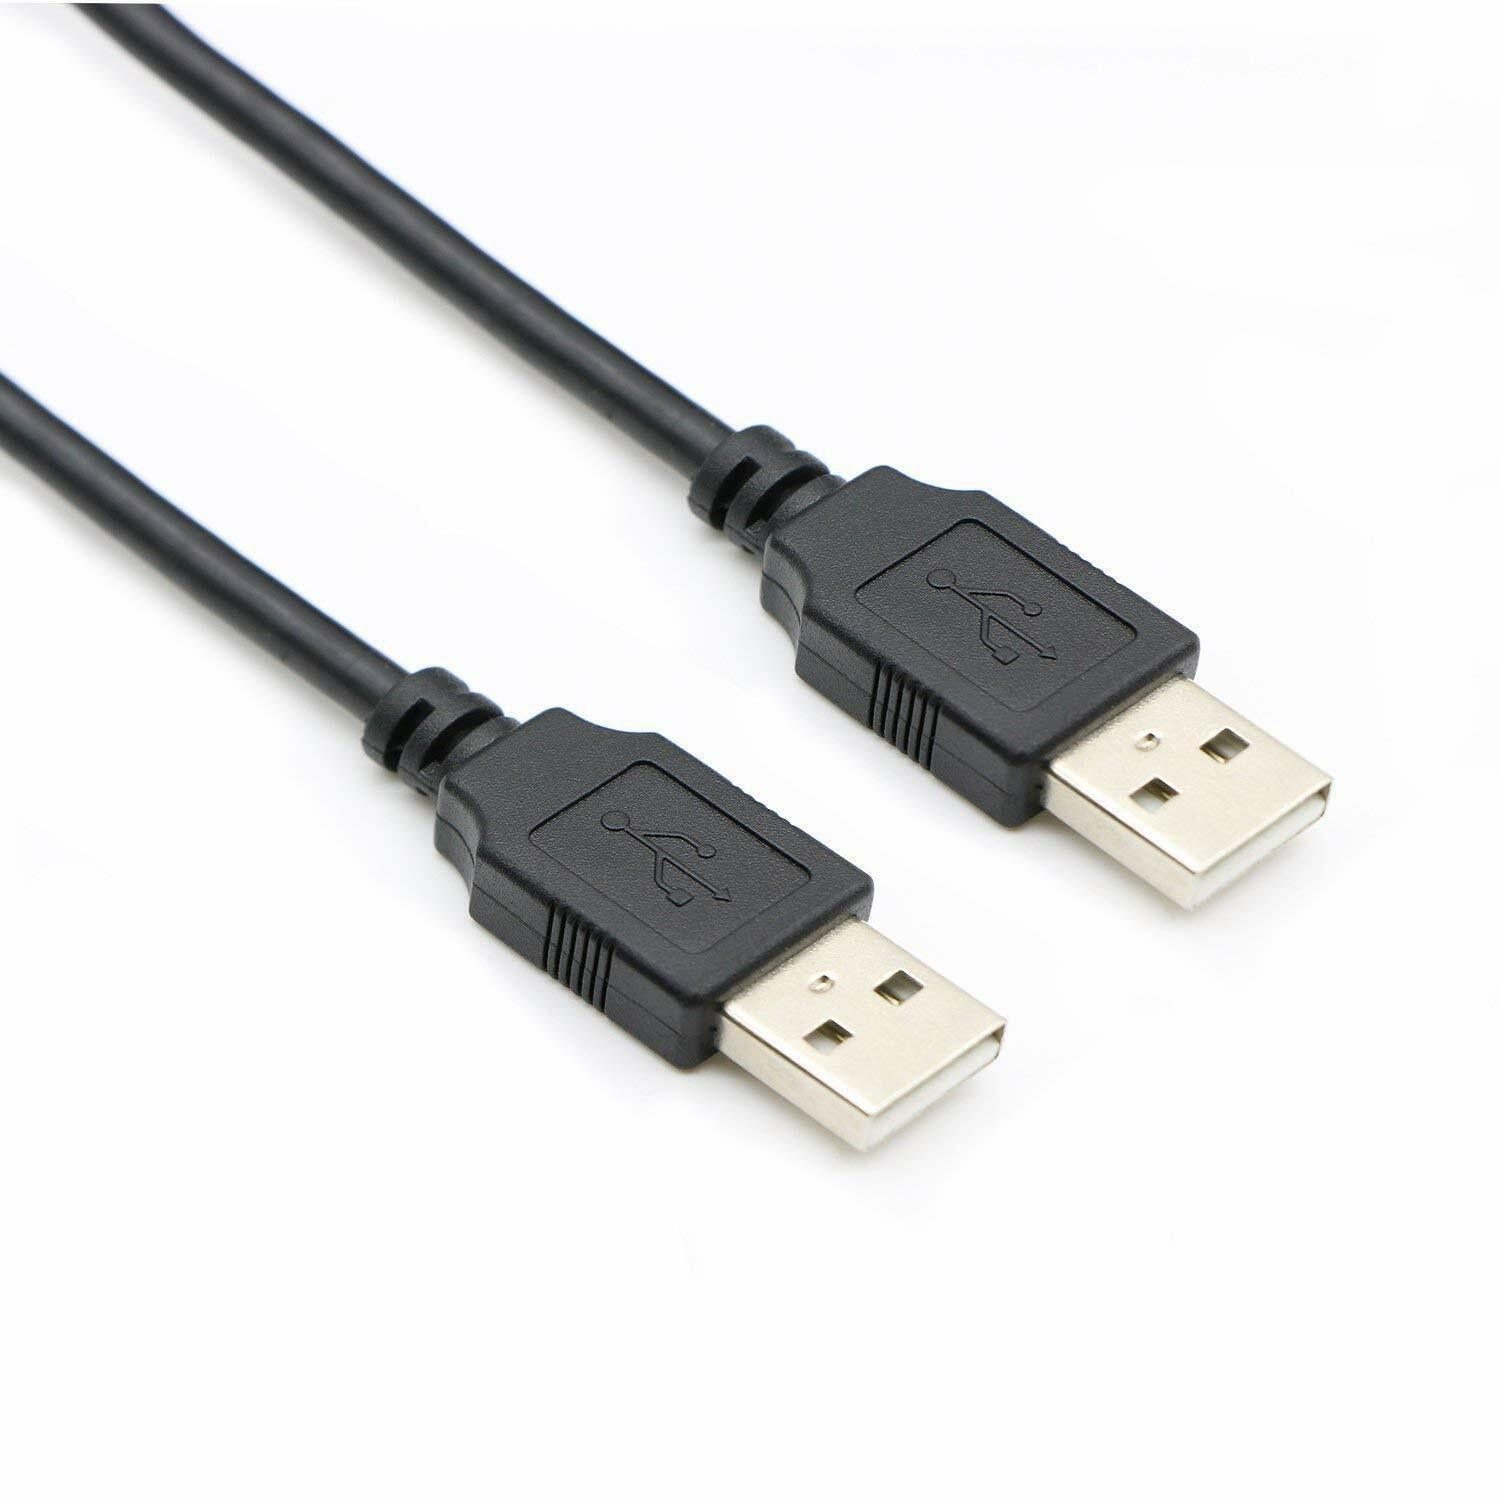 USB Cable 2.0/3.0 A-Male Data Wire Charger Black White Blue 3FT -15 FT Multi Lot